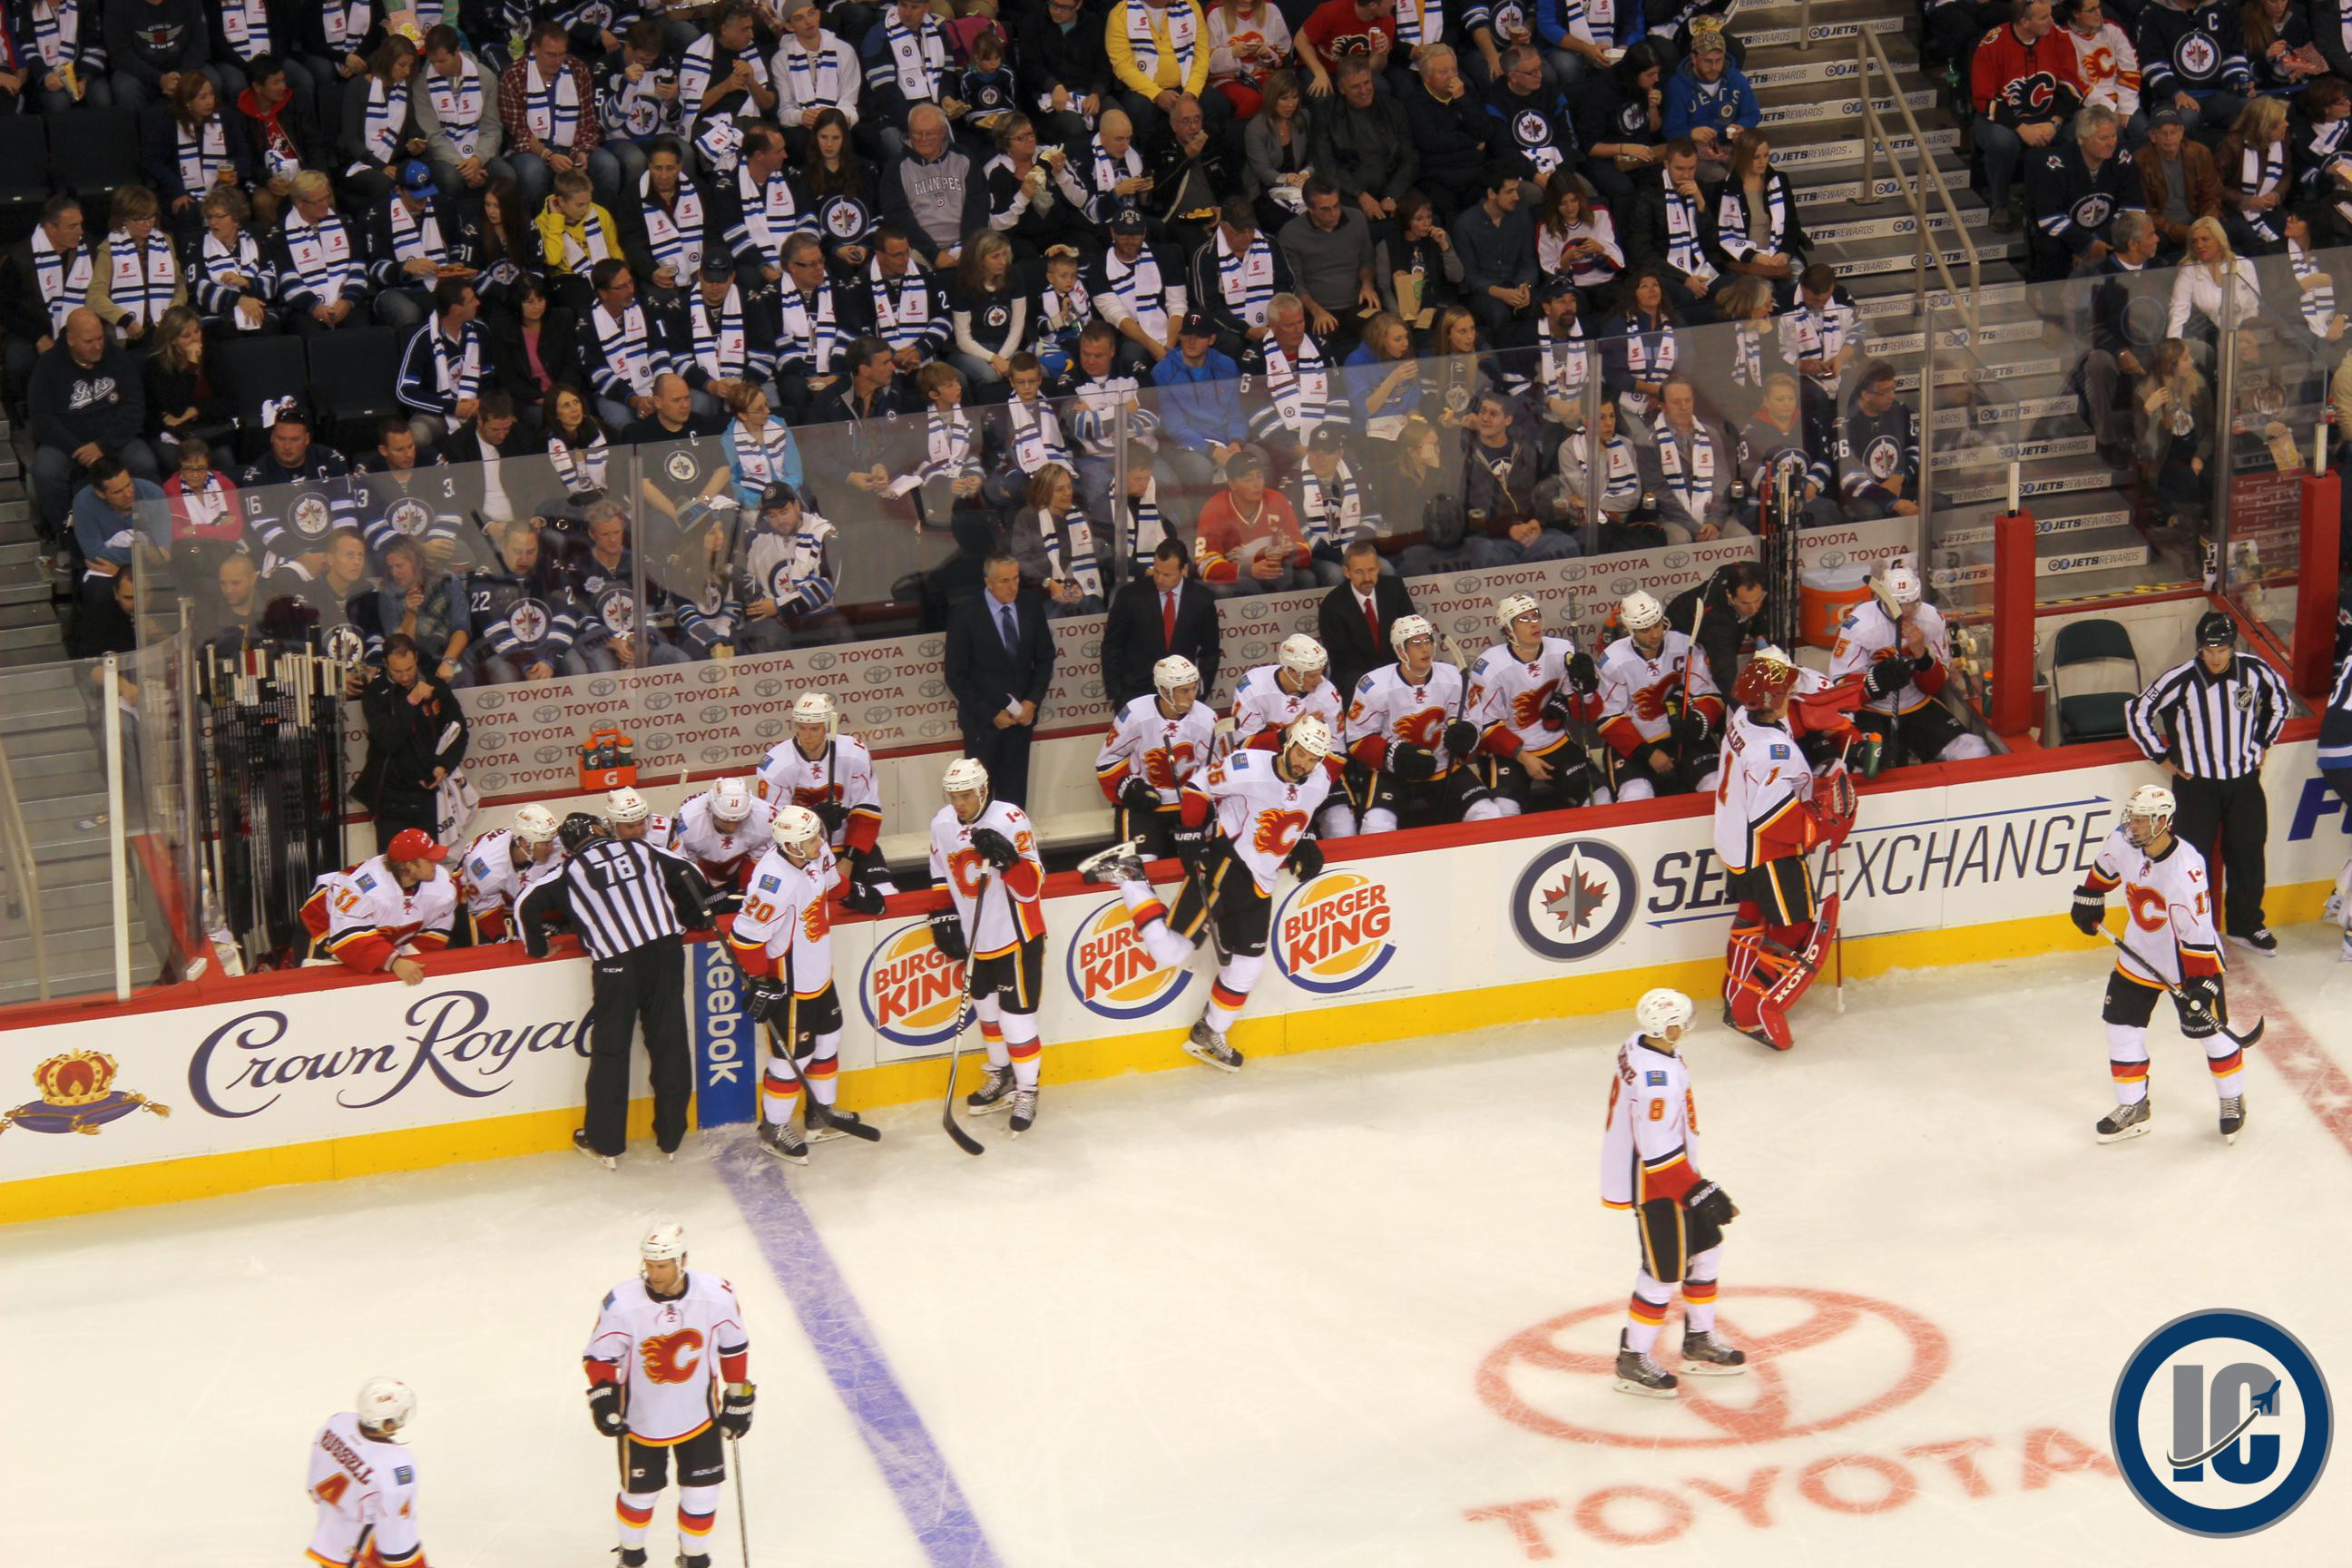 Flames bench Oct 19 2014